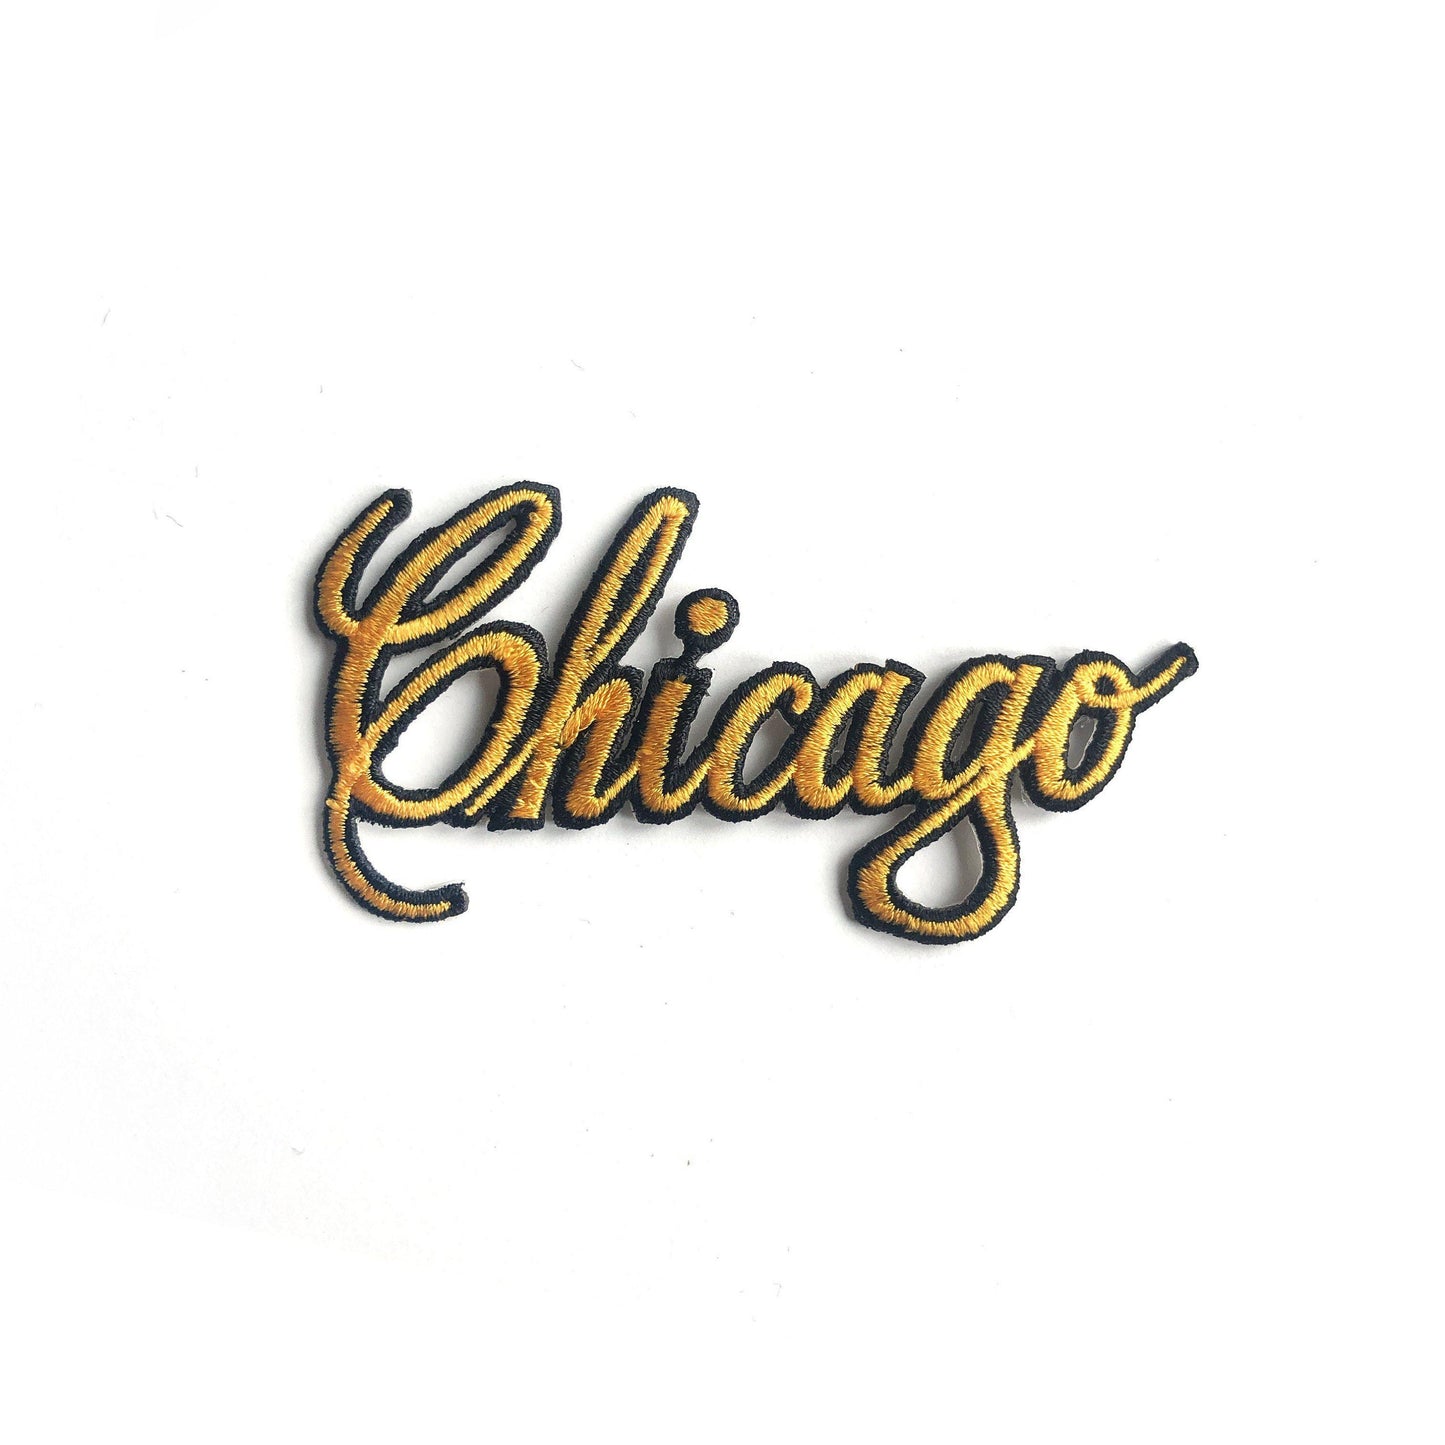 Vintage Chicago Patch